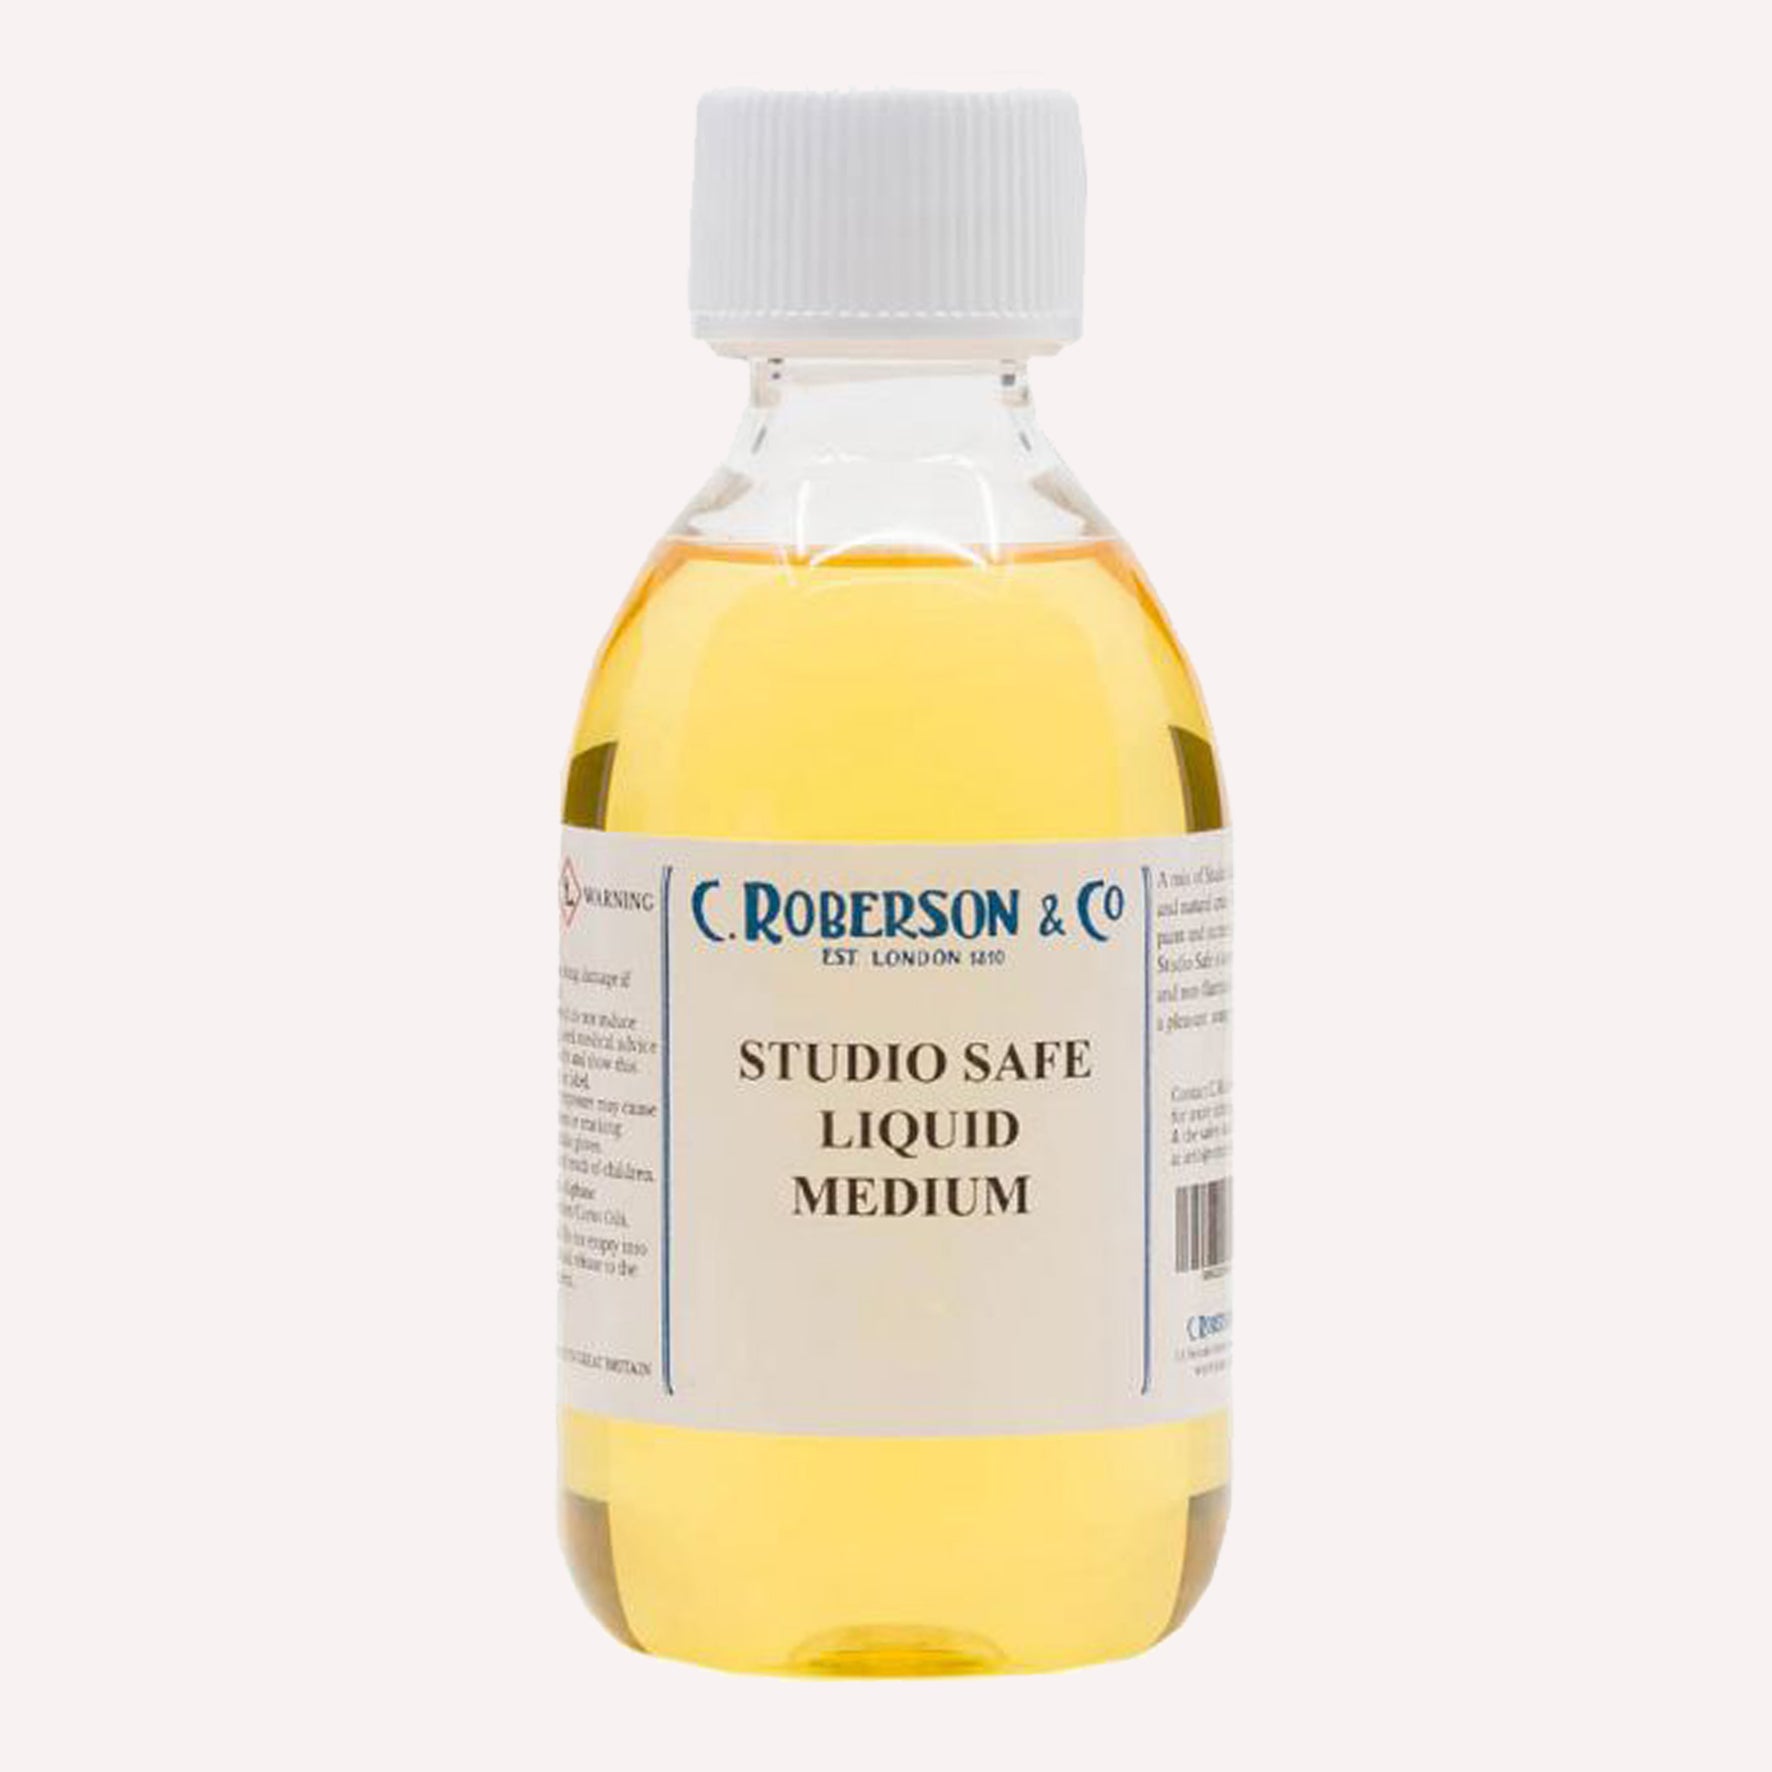 Roberson & Co Studio Safe Liquid Medium packaged in a 250ml bottle used to thin oil based mediums and increase gloss. 